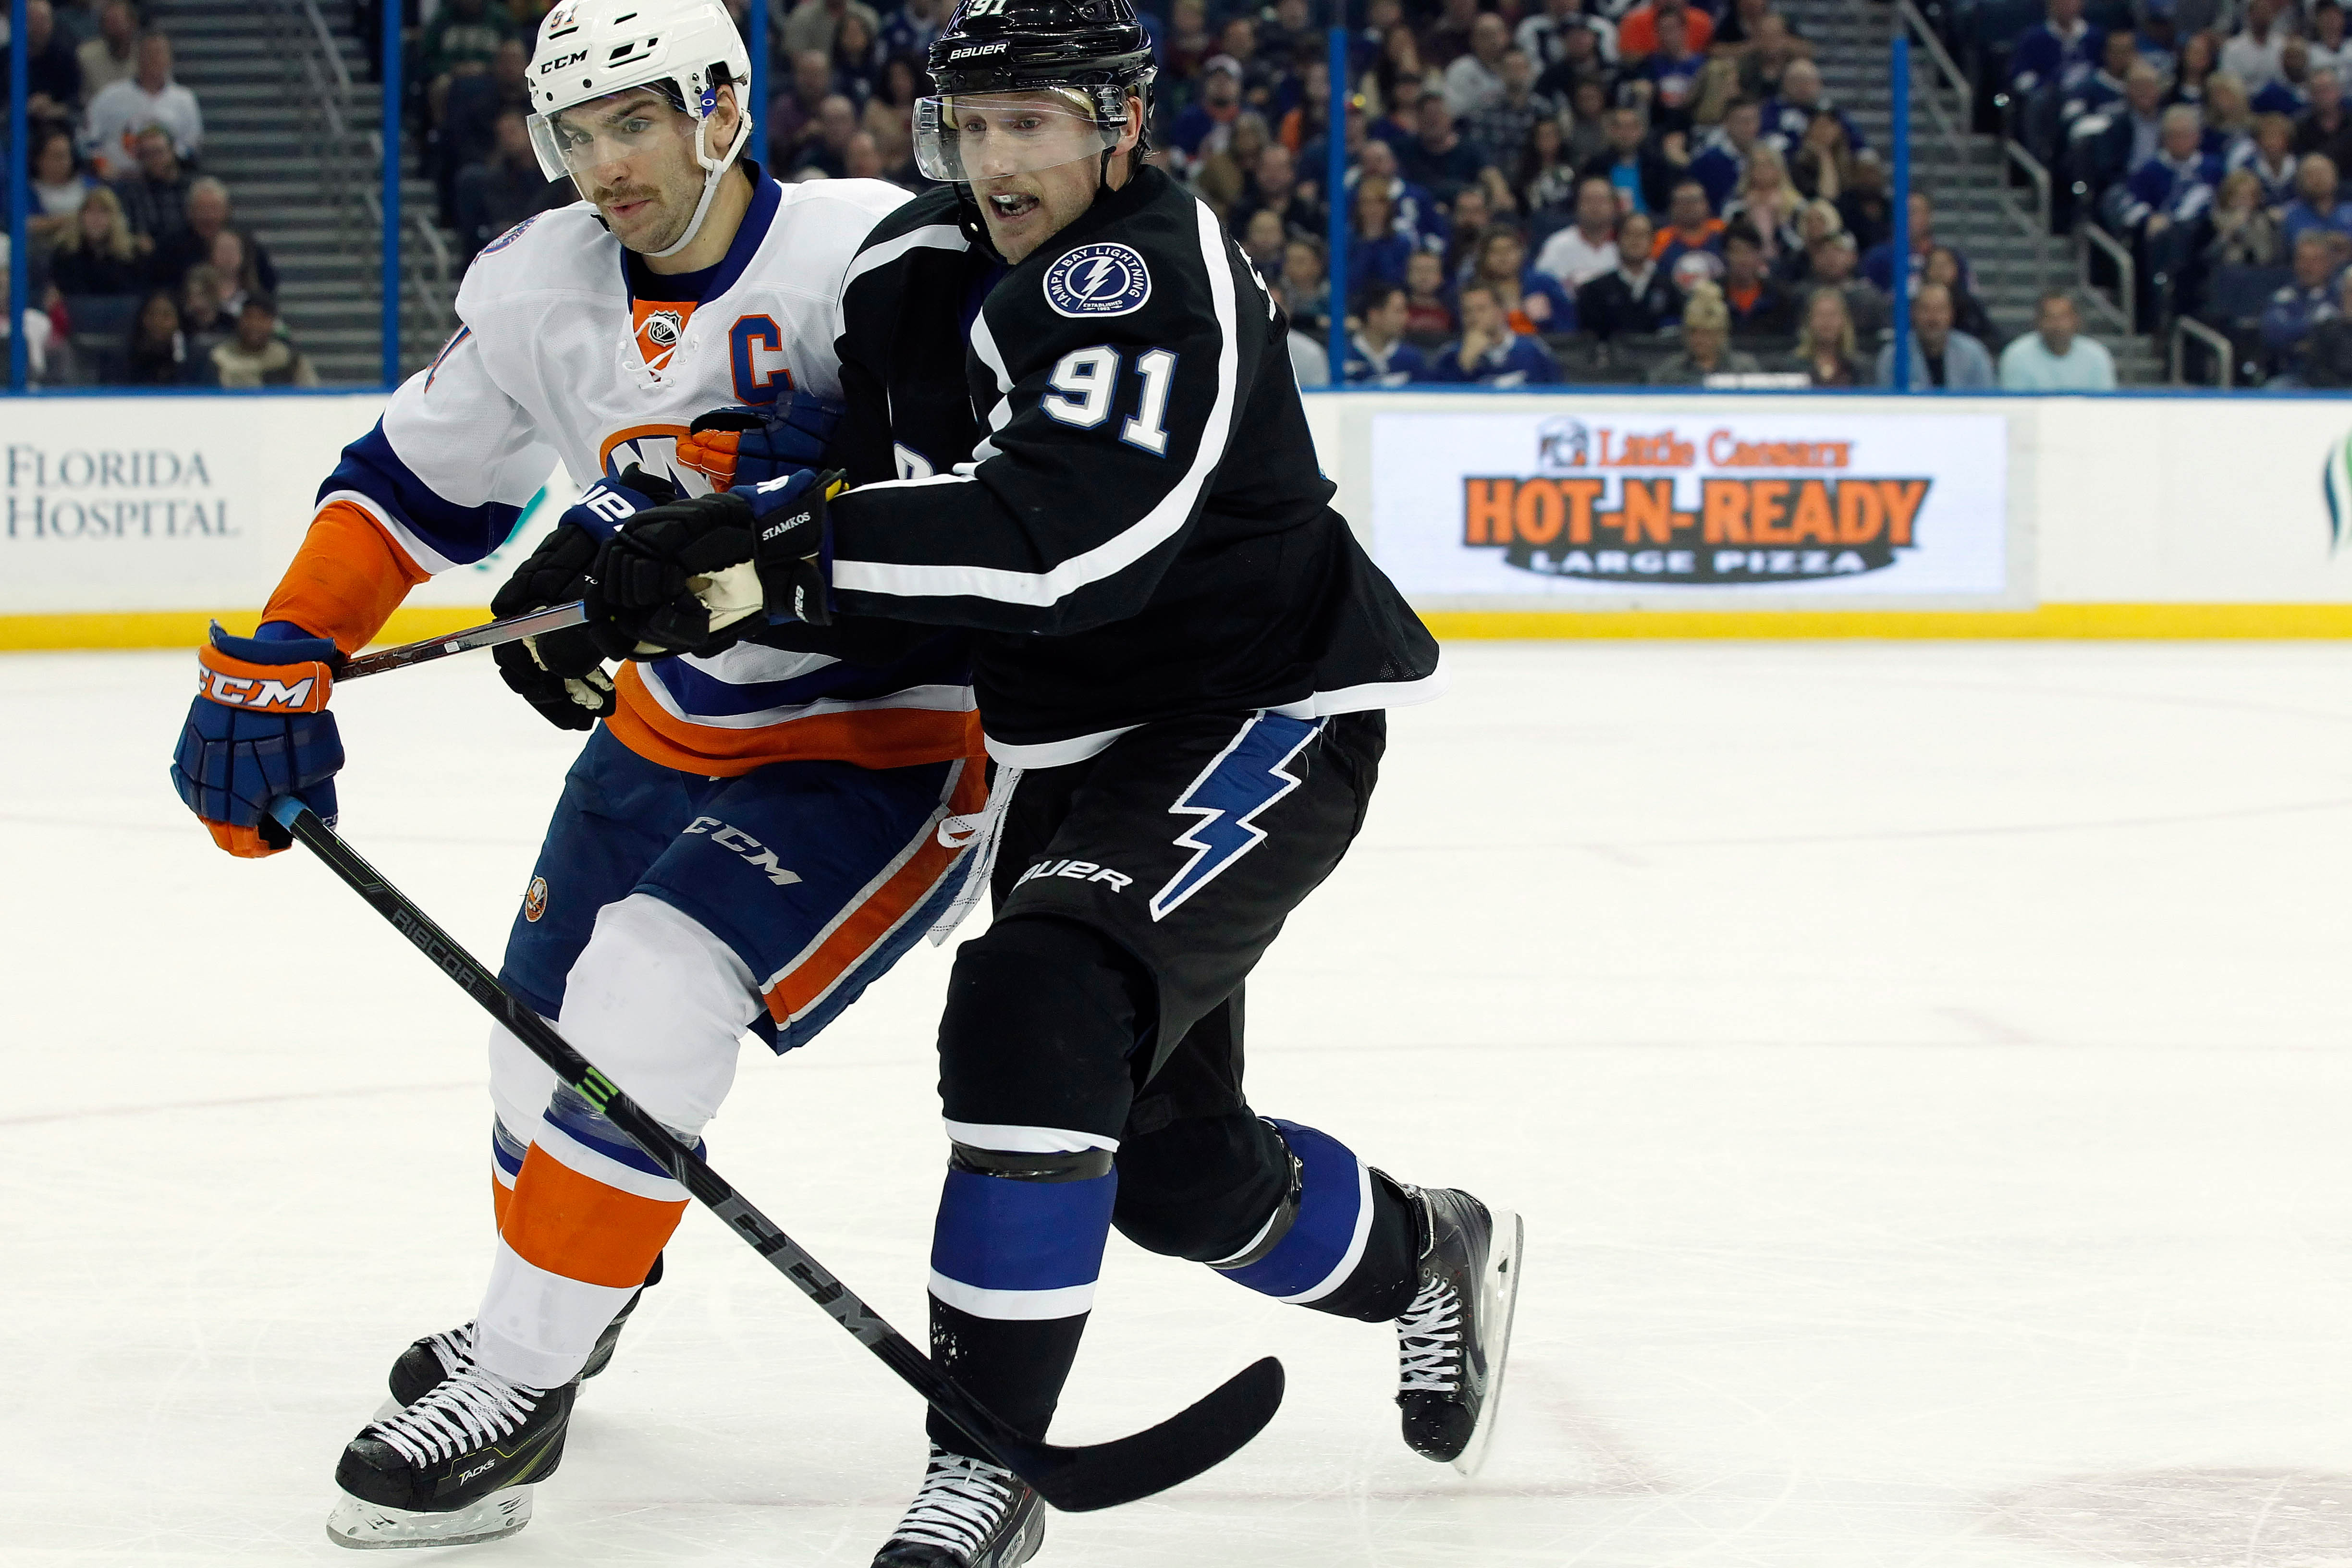 John Tavares and Steven Stamkos in a 2014 game.